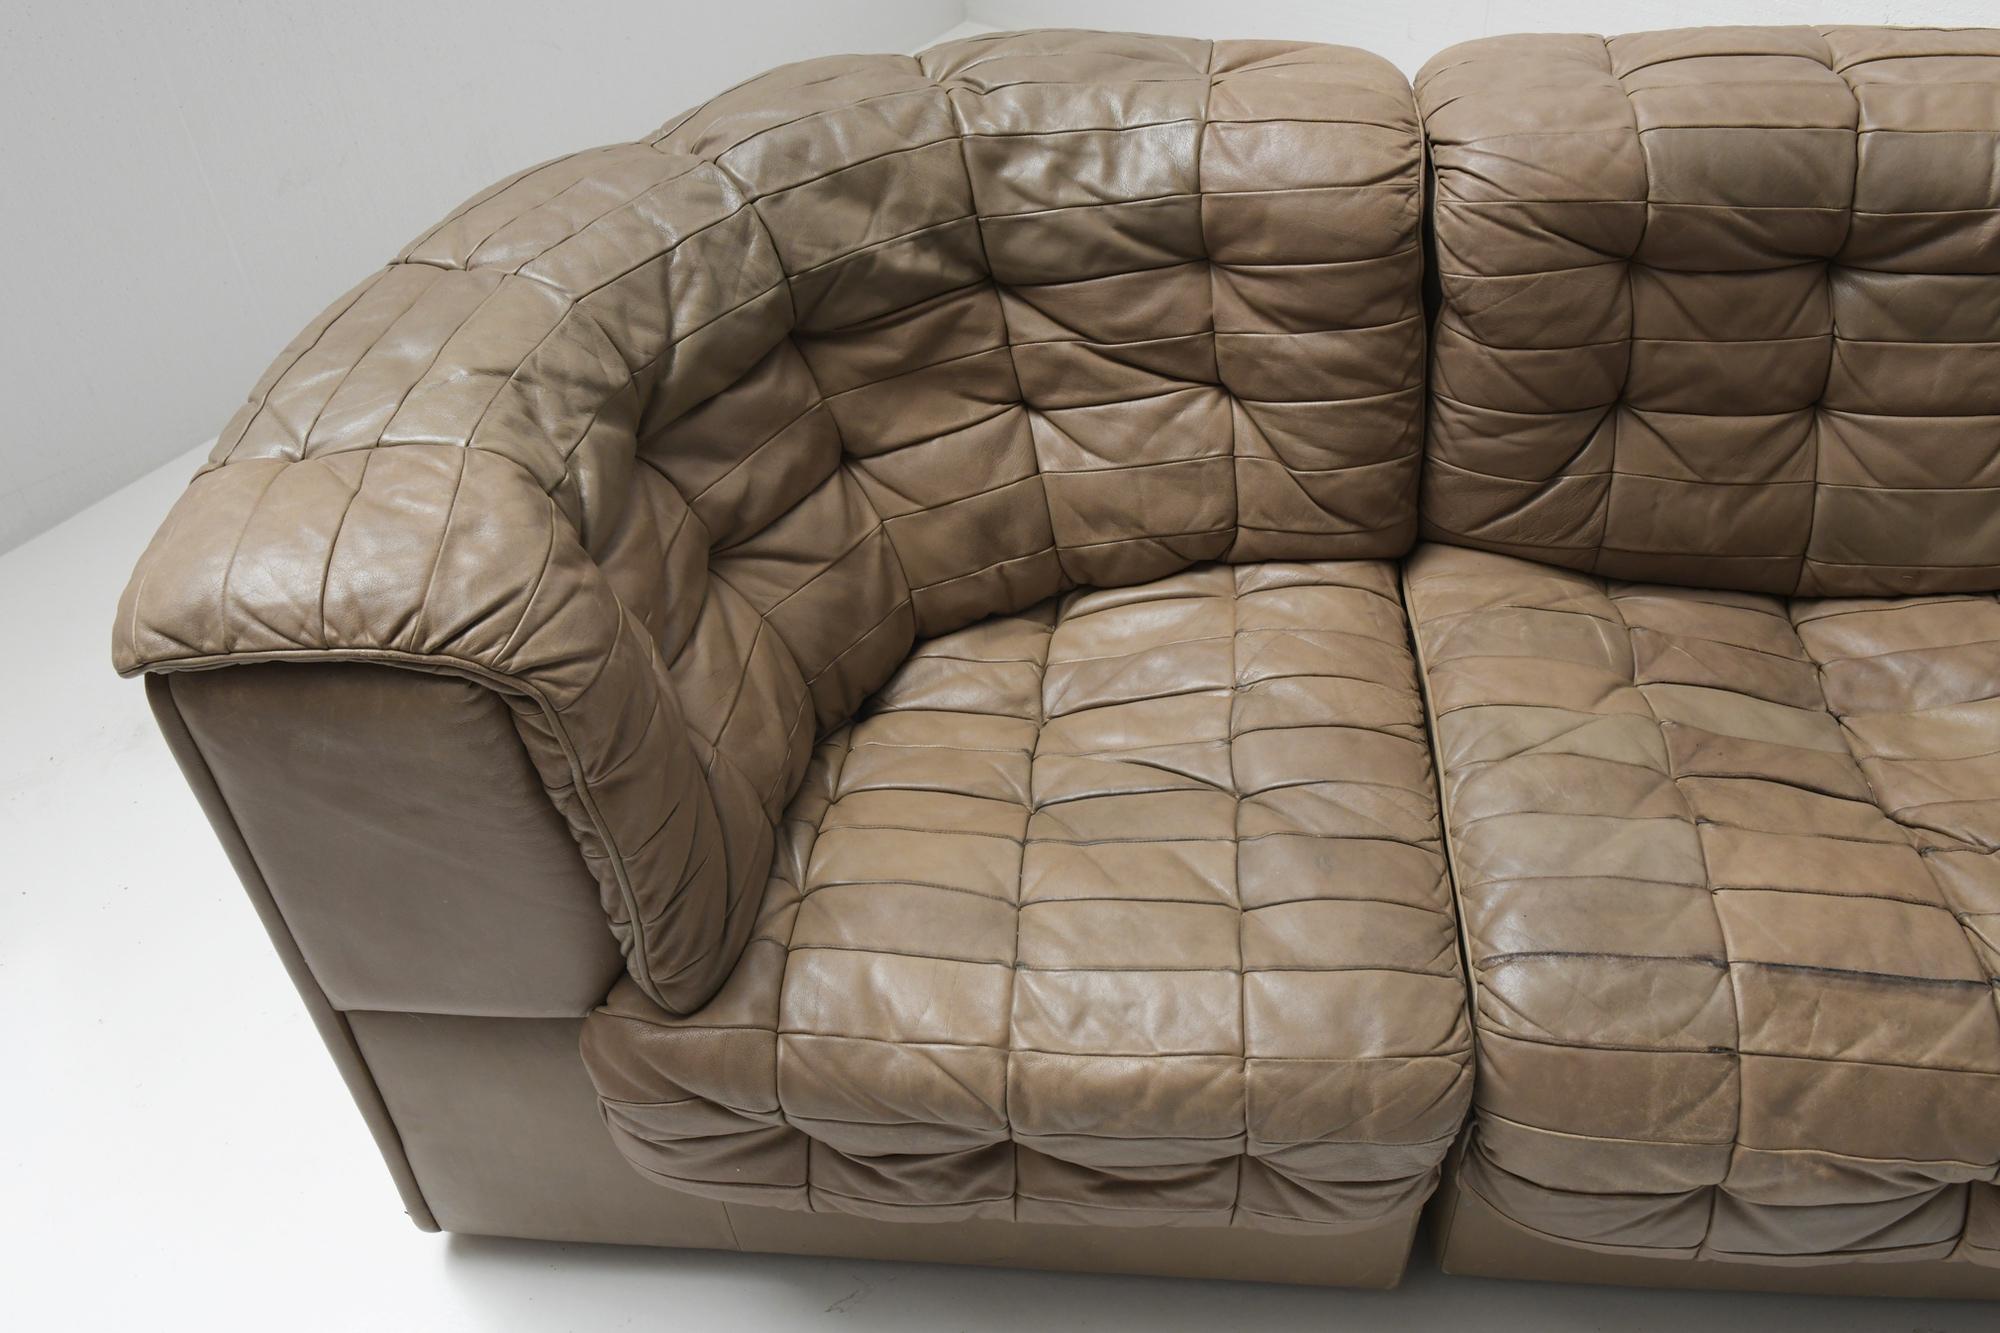 Ds 11 Modular Sofa in Brown Patchwork Leather by De Sede Team for De Sede Swiss For Sale 2